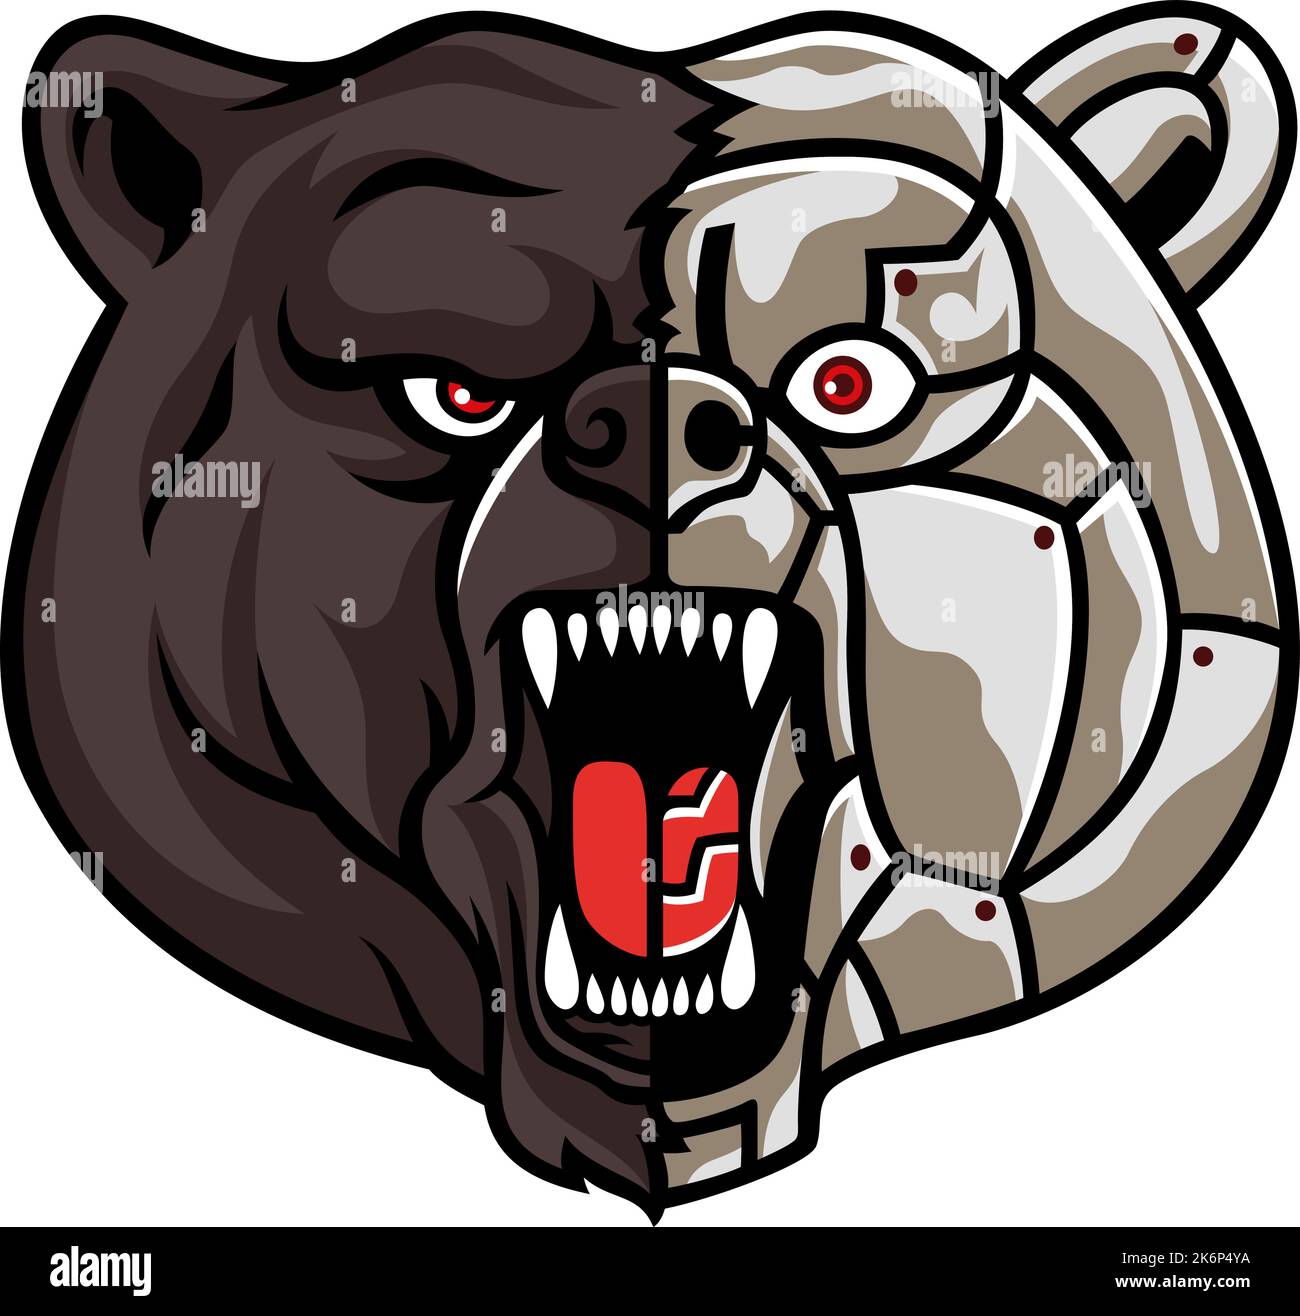 Illustration of Grizzly Bear Head Roaring with a Half Robot Face Stock Vector